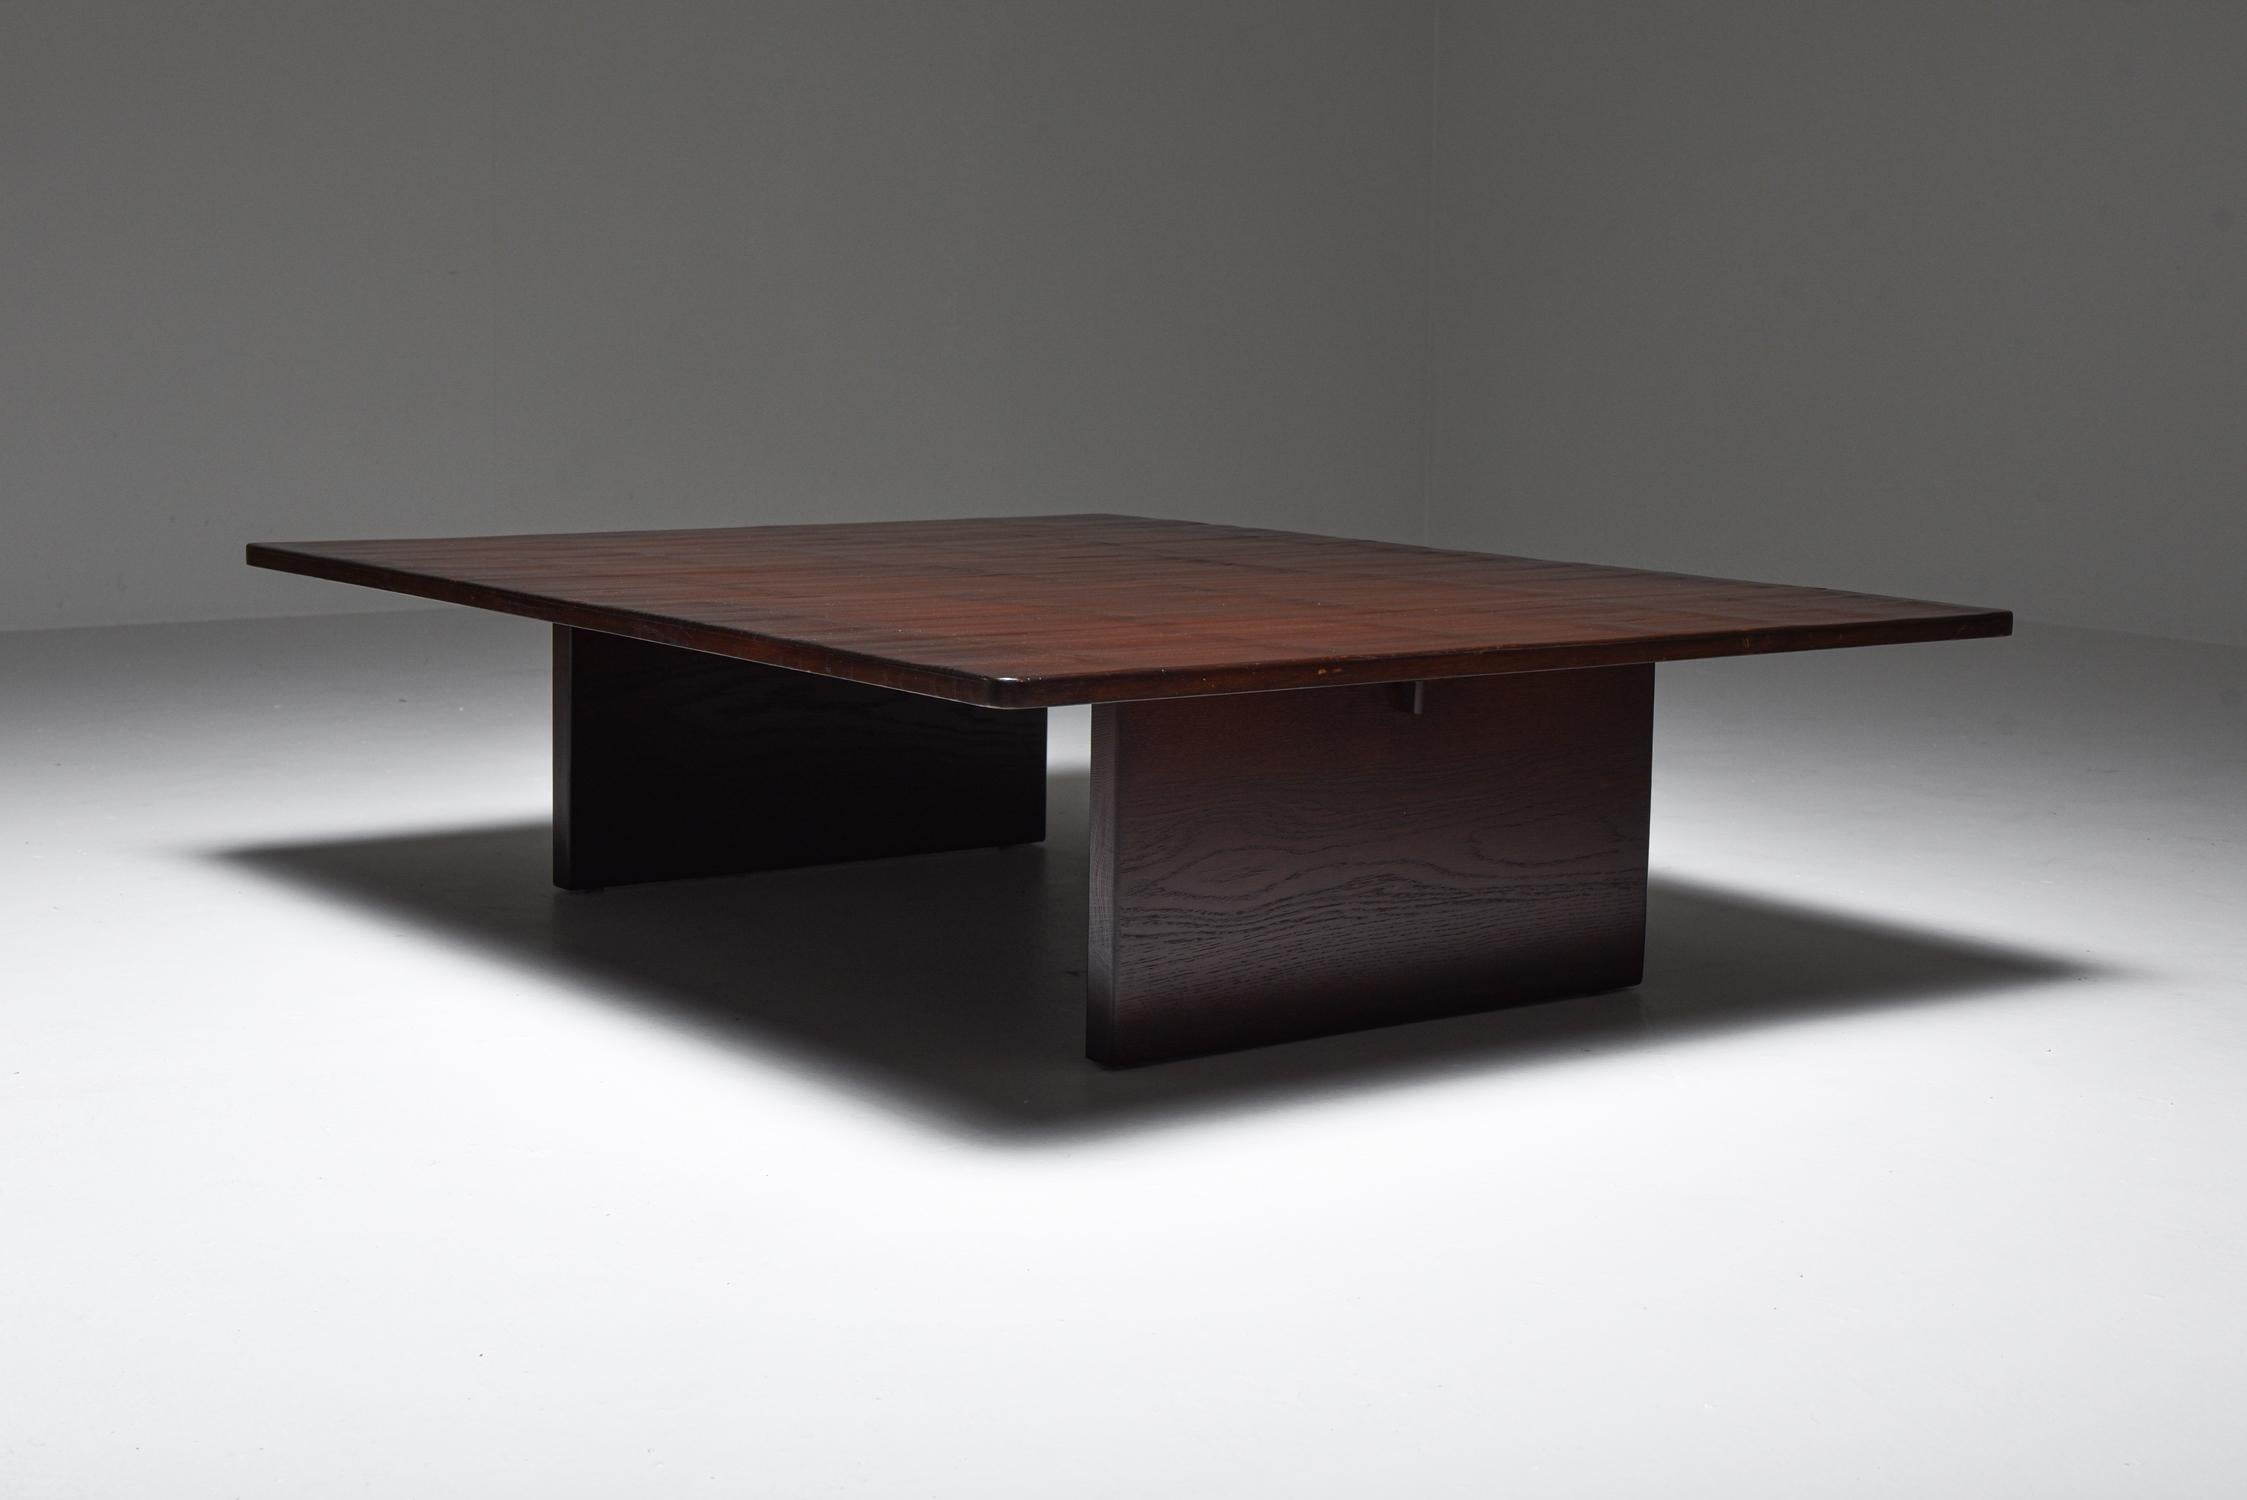 Axel Vervoordt, Belgium 1980, coffee table in solid oak and bamboo.

Conceived and produced by the great Belgian decorator & art dealer in the 1980s.
Rolls of bamboo were ordered in China to top these custom designed coffee tables. 
Through this